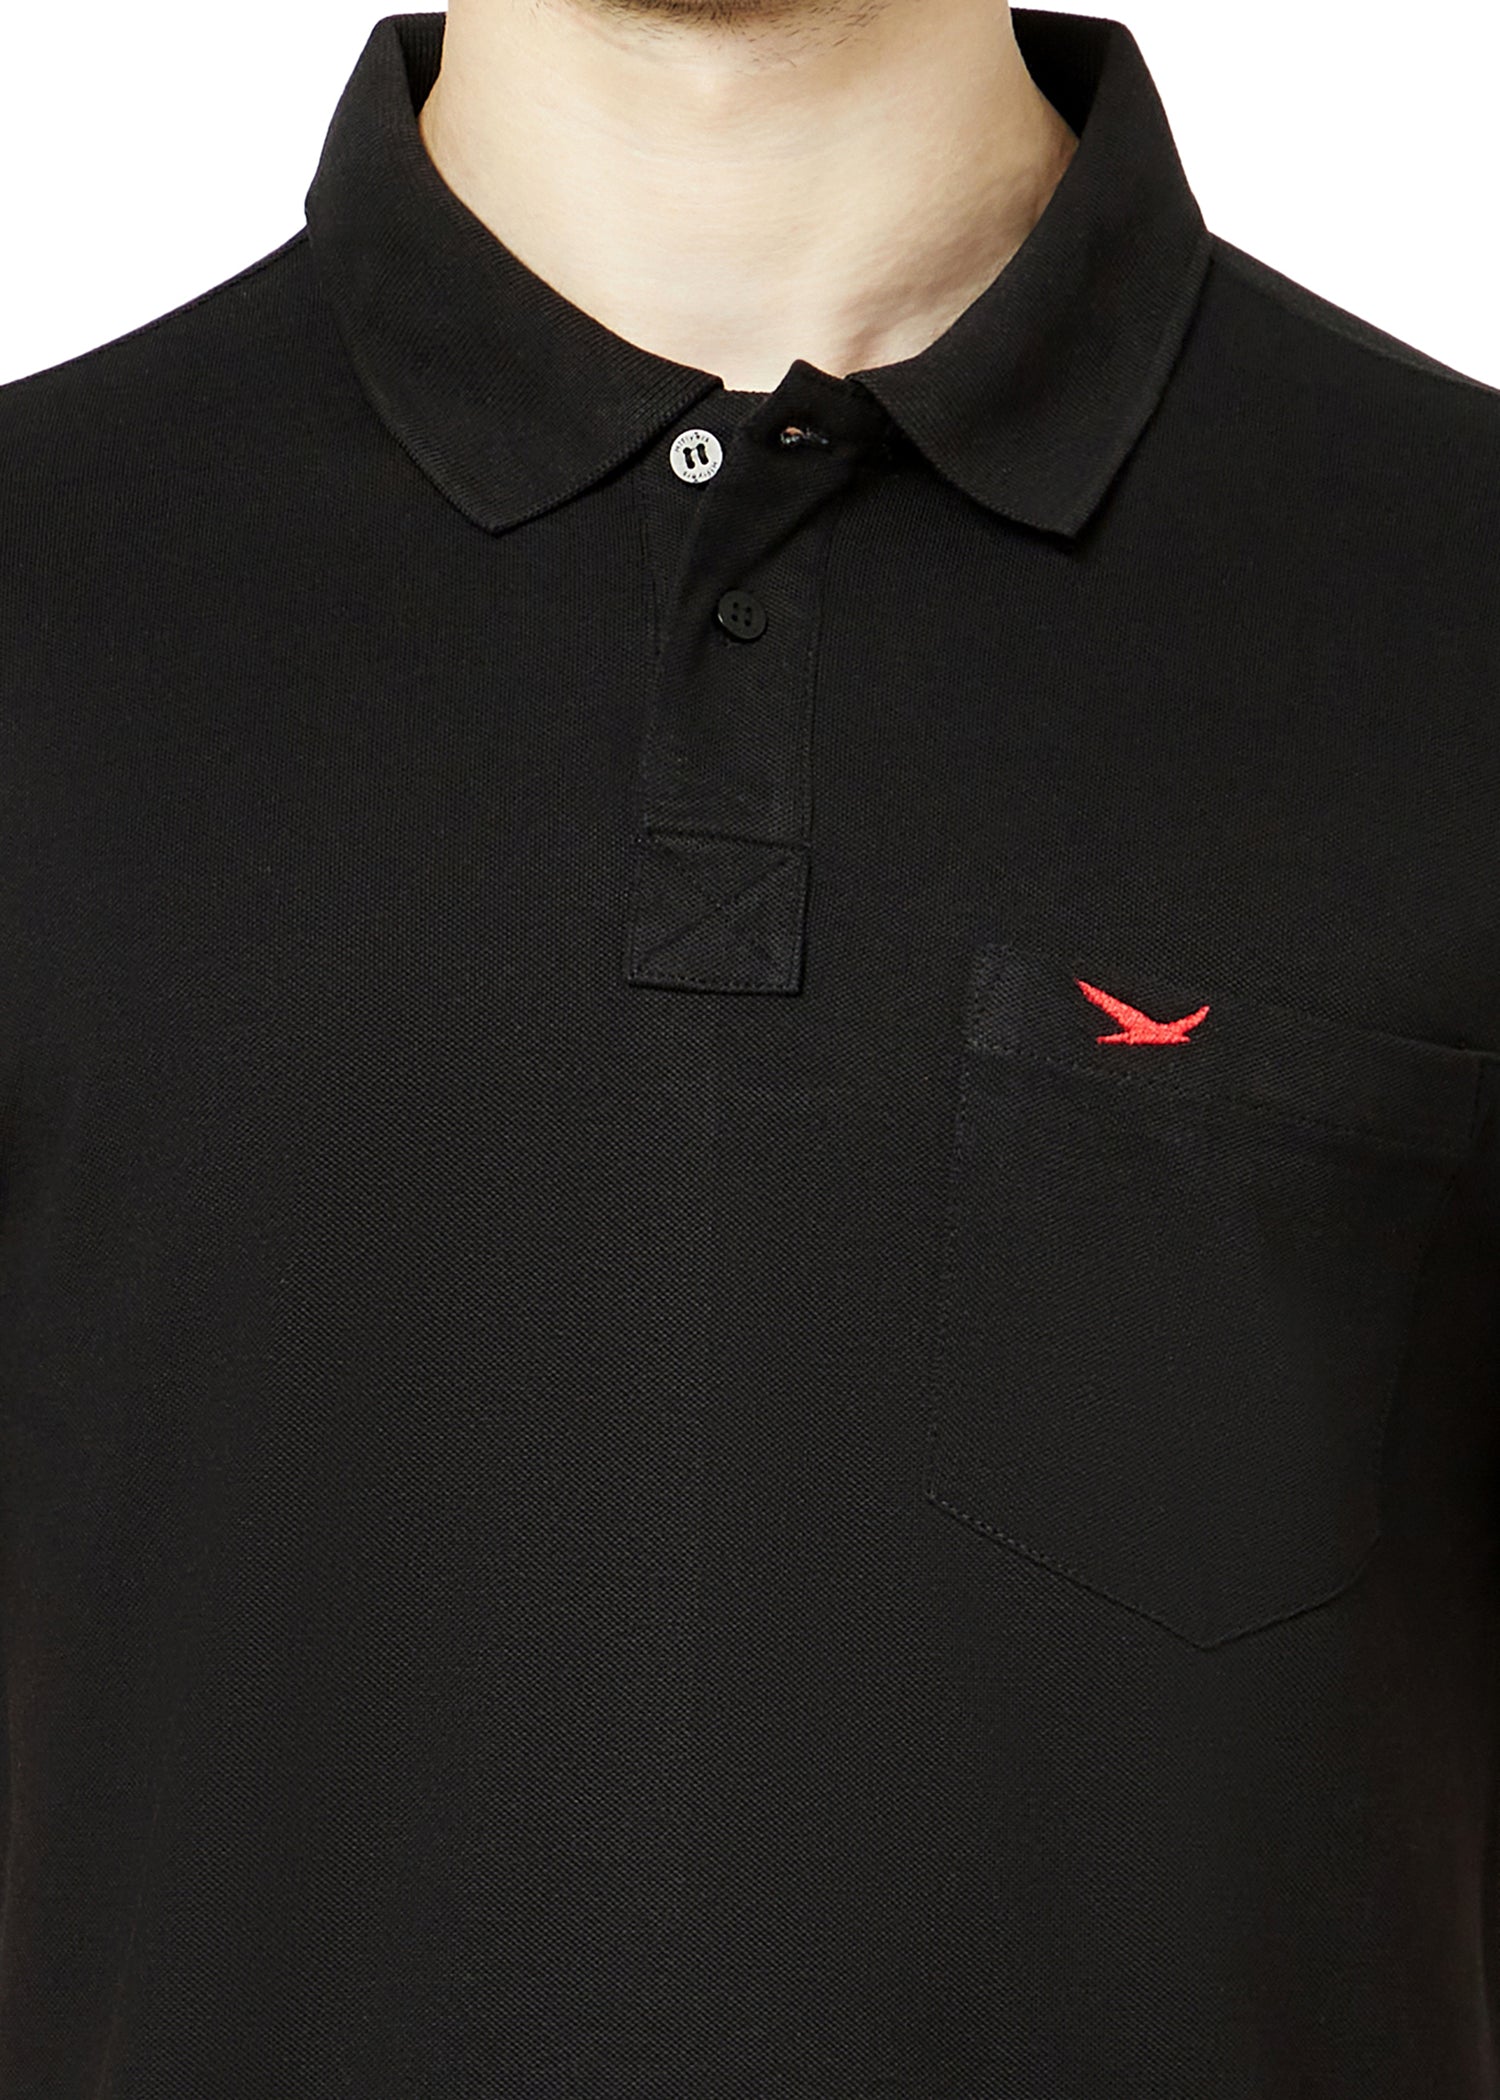 Hiflyers Men'S Solid Regular Fit Polo T-Shirt With Pocket -Black